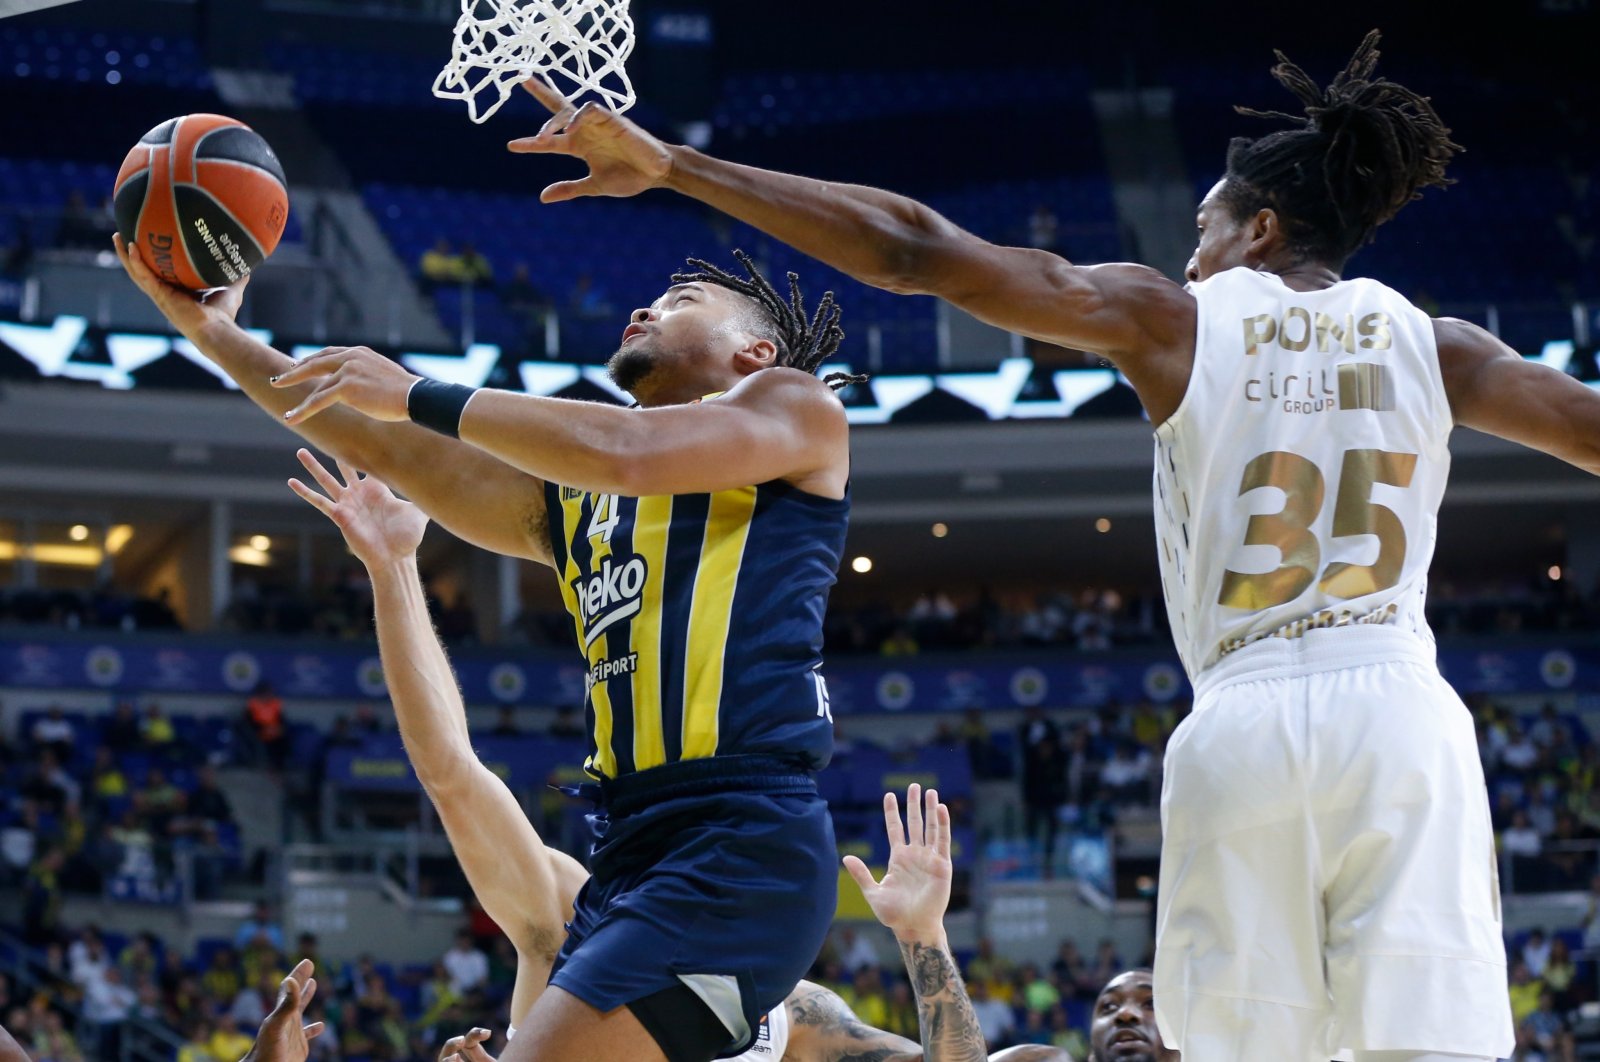 Fenerbahçe&#039;s Carsen Edwards goes past ASVEL&#039;s Yves Pons (R) during the EuroLeague match, Istanbul, Turkey, Oct. 18, 2022. (DHA Photo)